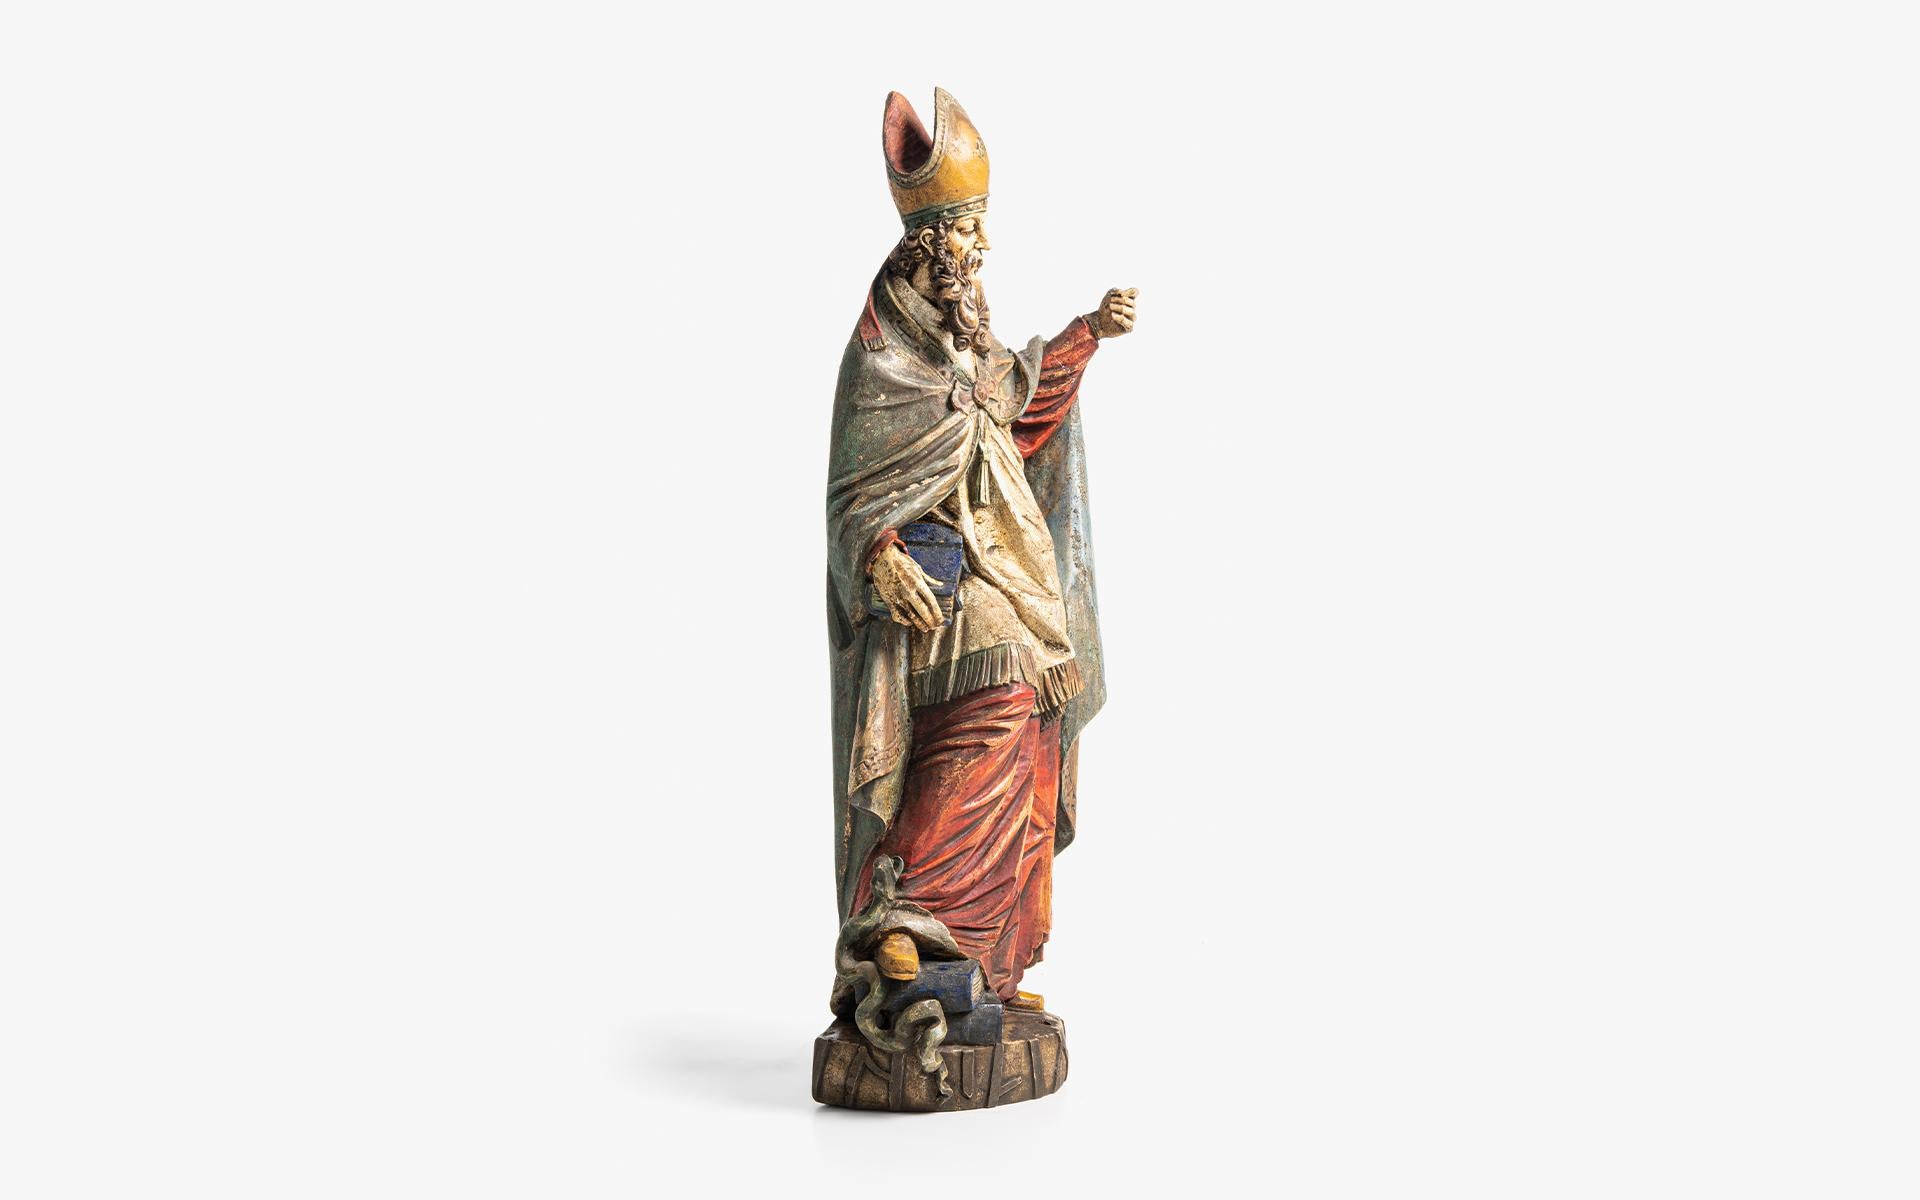 Baroque style, polychrome wood, origin in Italy, 19th century, St. Patrick Statue

Width: 30 cm / 11.81 inches
Depth: 16 cm / 6.3 inches
Height: 83 cm / 32.68 inches